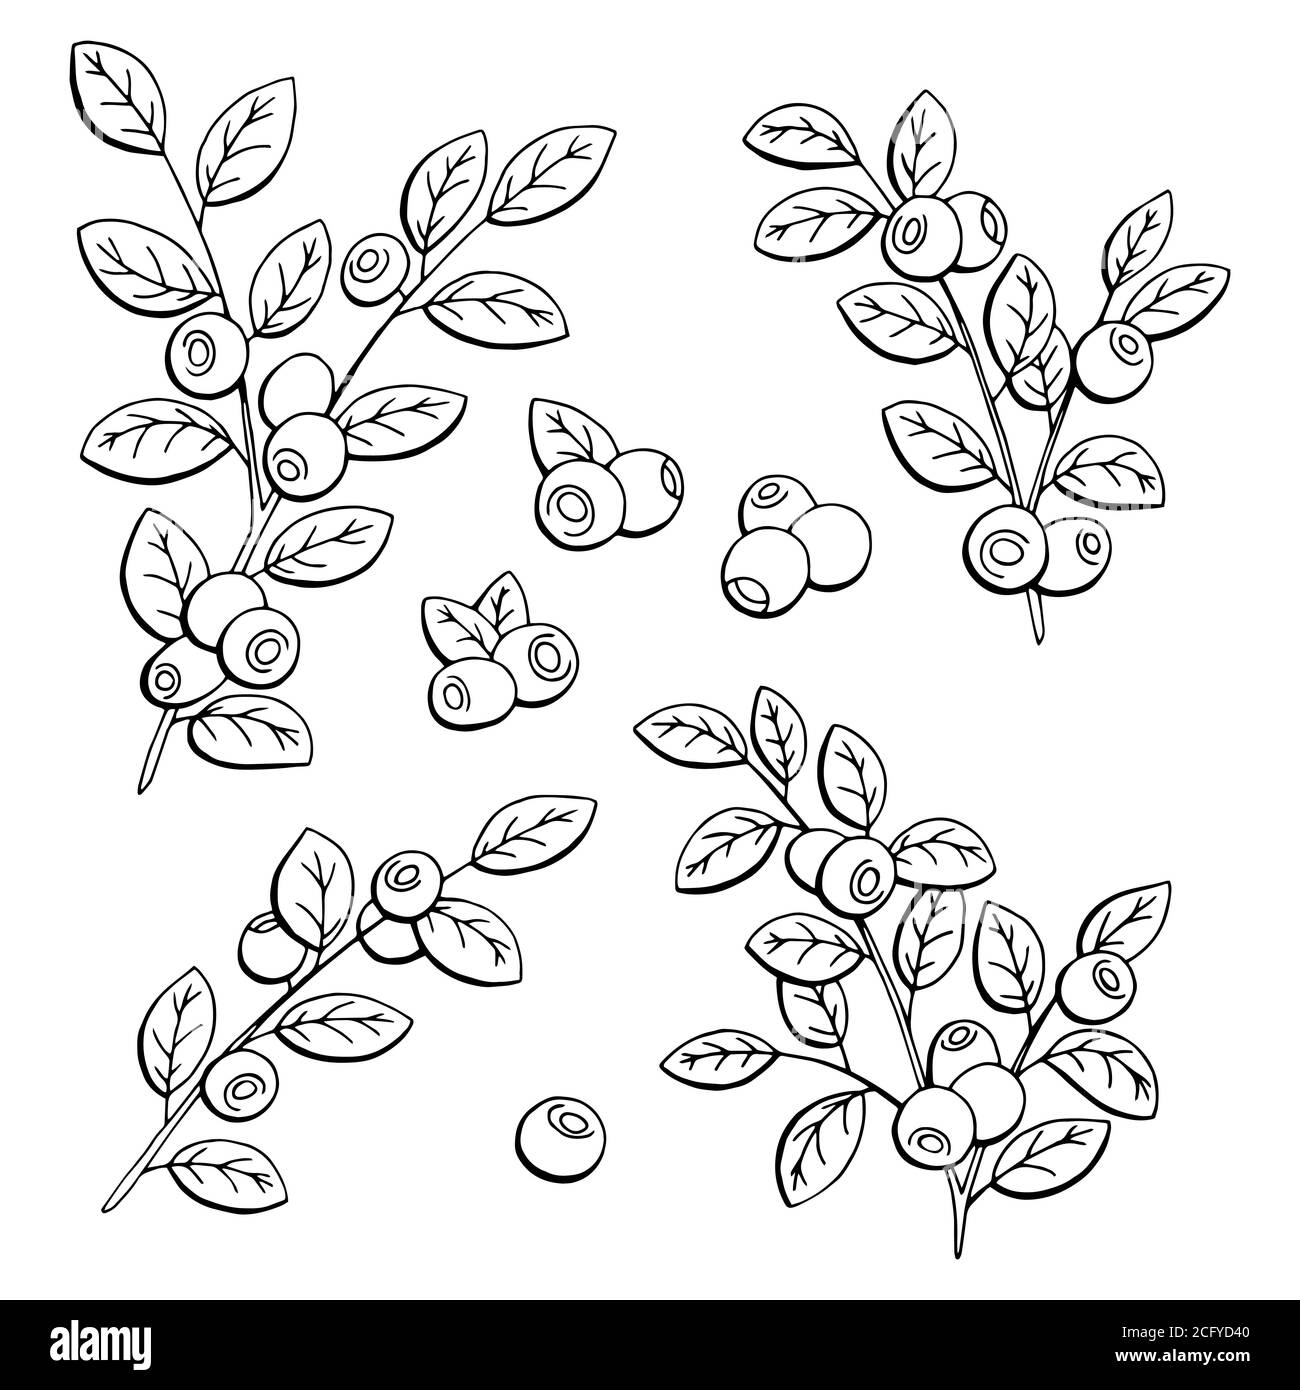 Blueberry graphic black white isolated sketch illustration vector Stock Vector